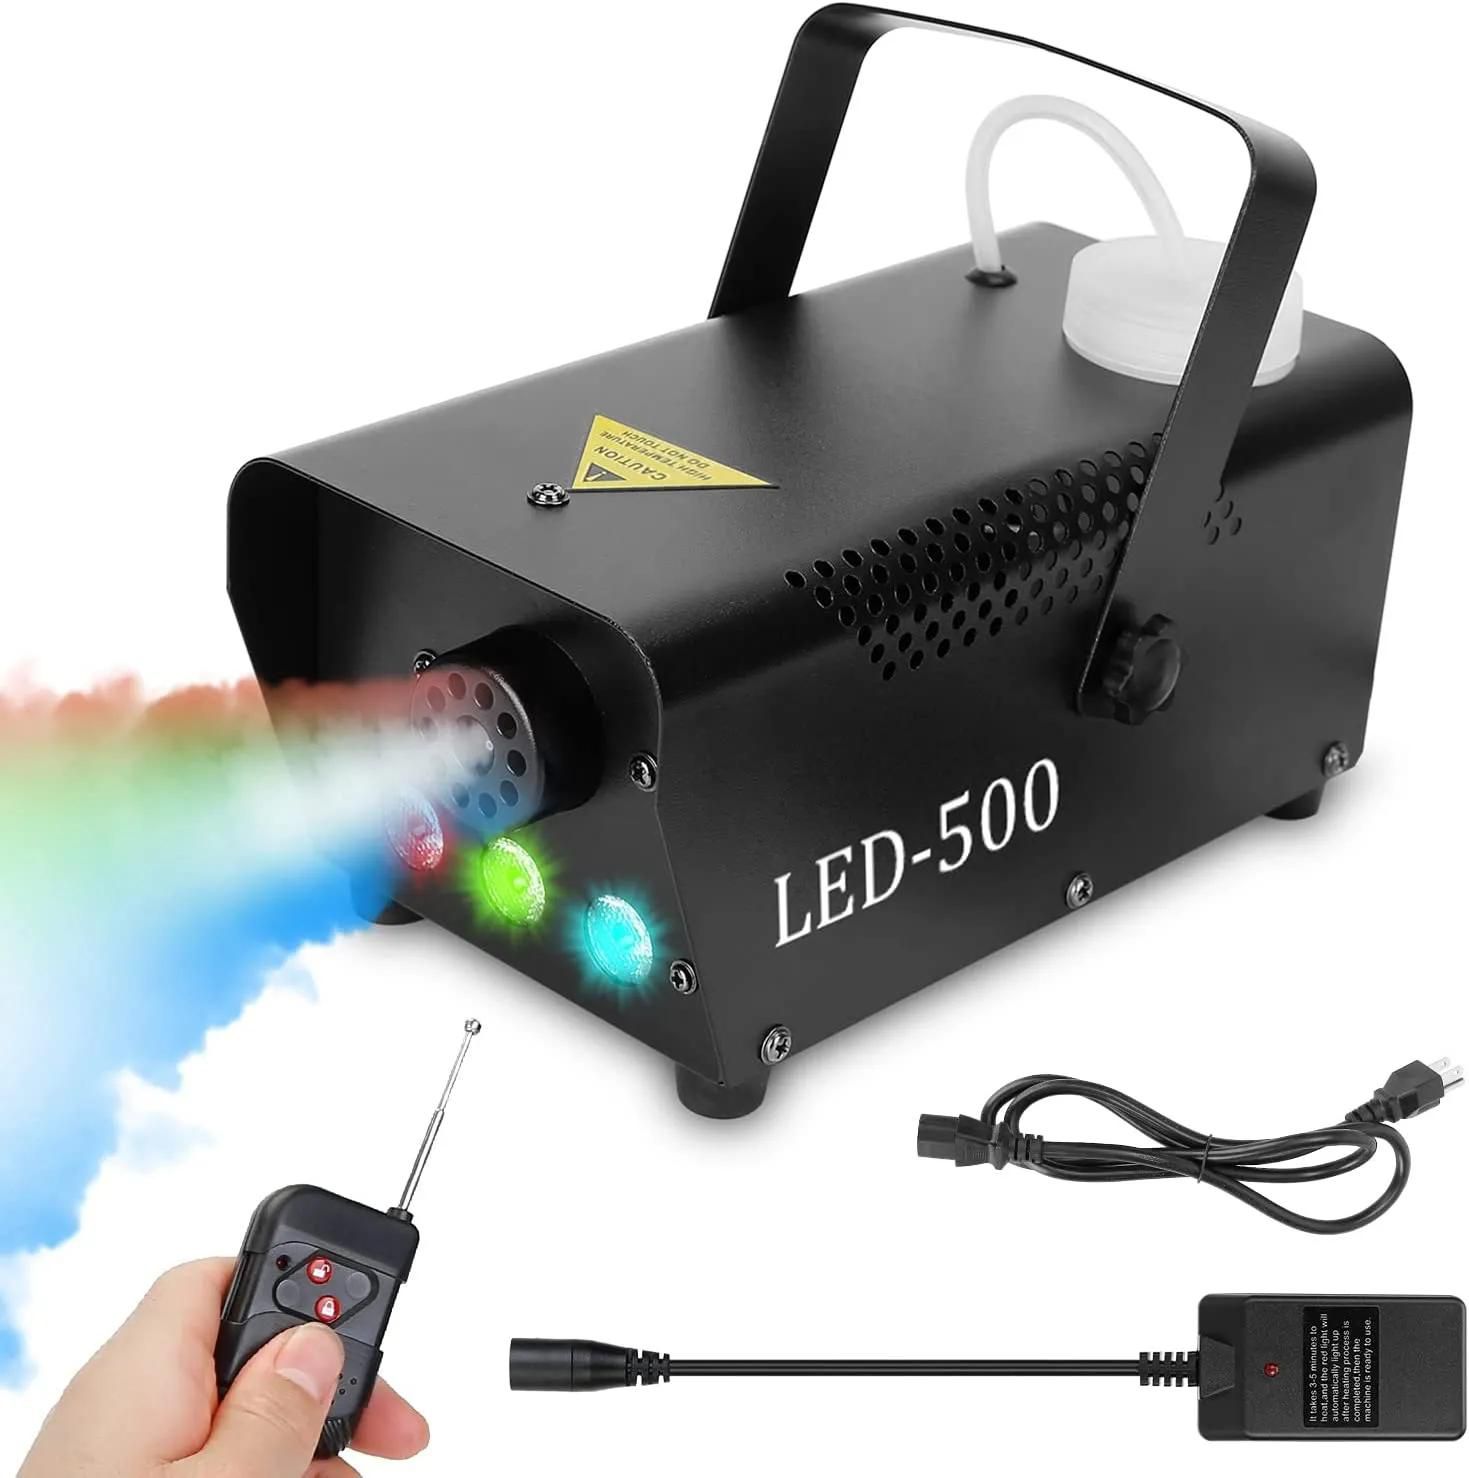 Fog Machine with Lights,Smoke Machine with 3 Stage LED Lights (Red, Blue, Green) & Wireless Remote Control for Parties Halloween Wedding Christmas Dance DJ